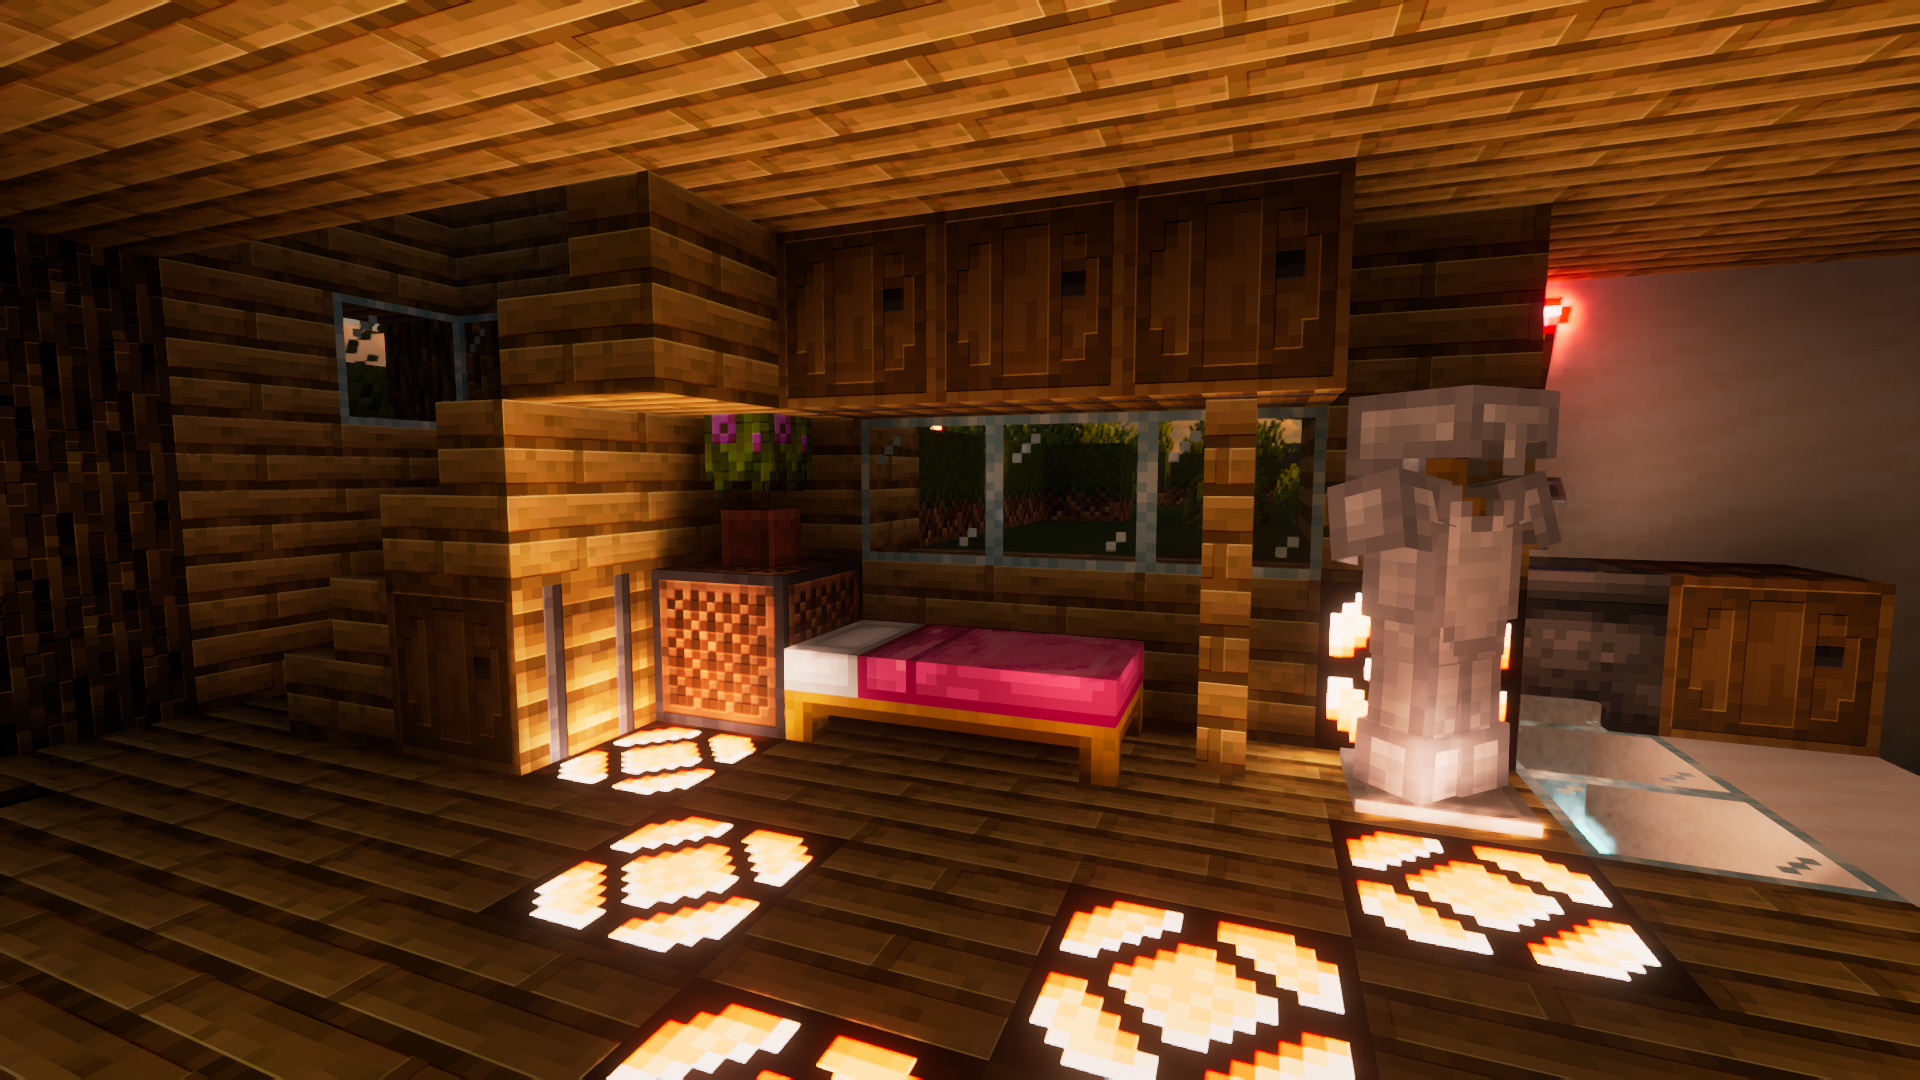 Minecraft Ray Tracing Path Tracing CGi Video Games Cube Bed Interior Wood 1920x1080